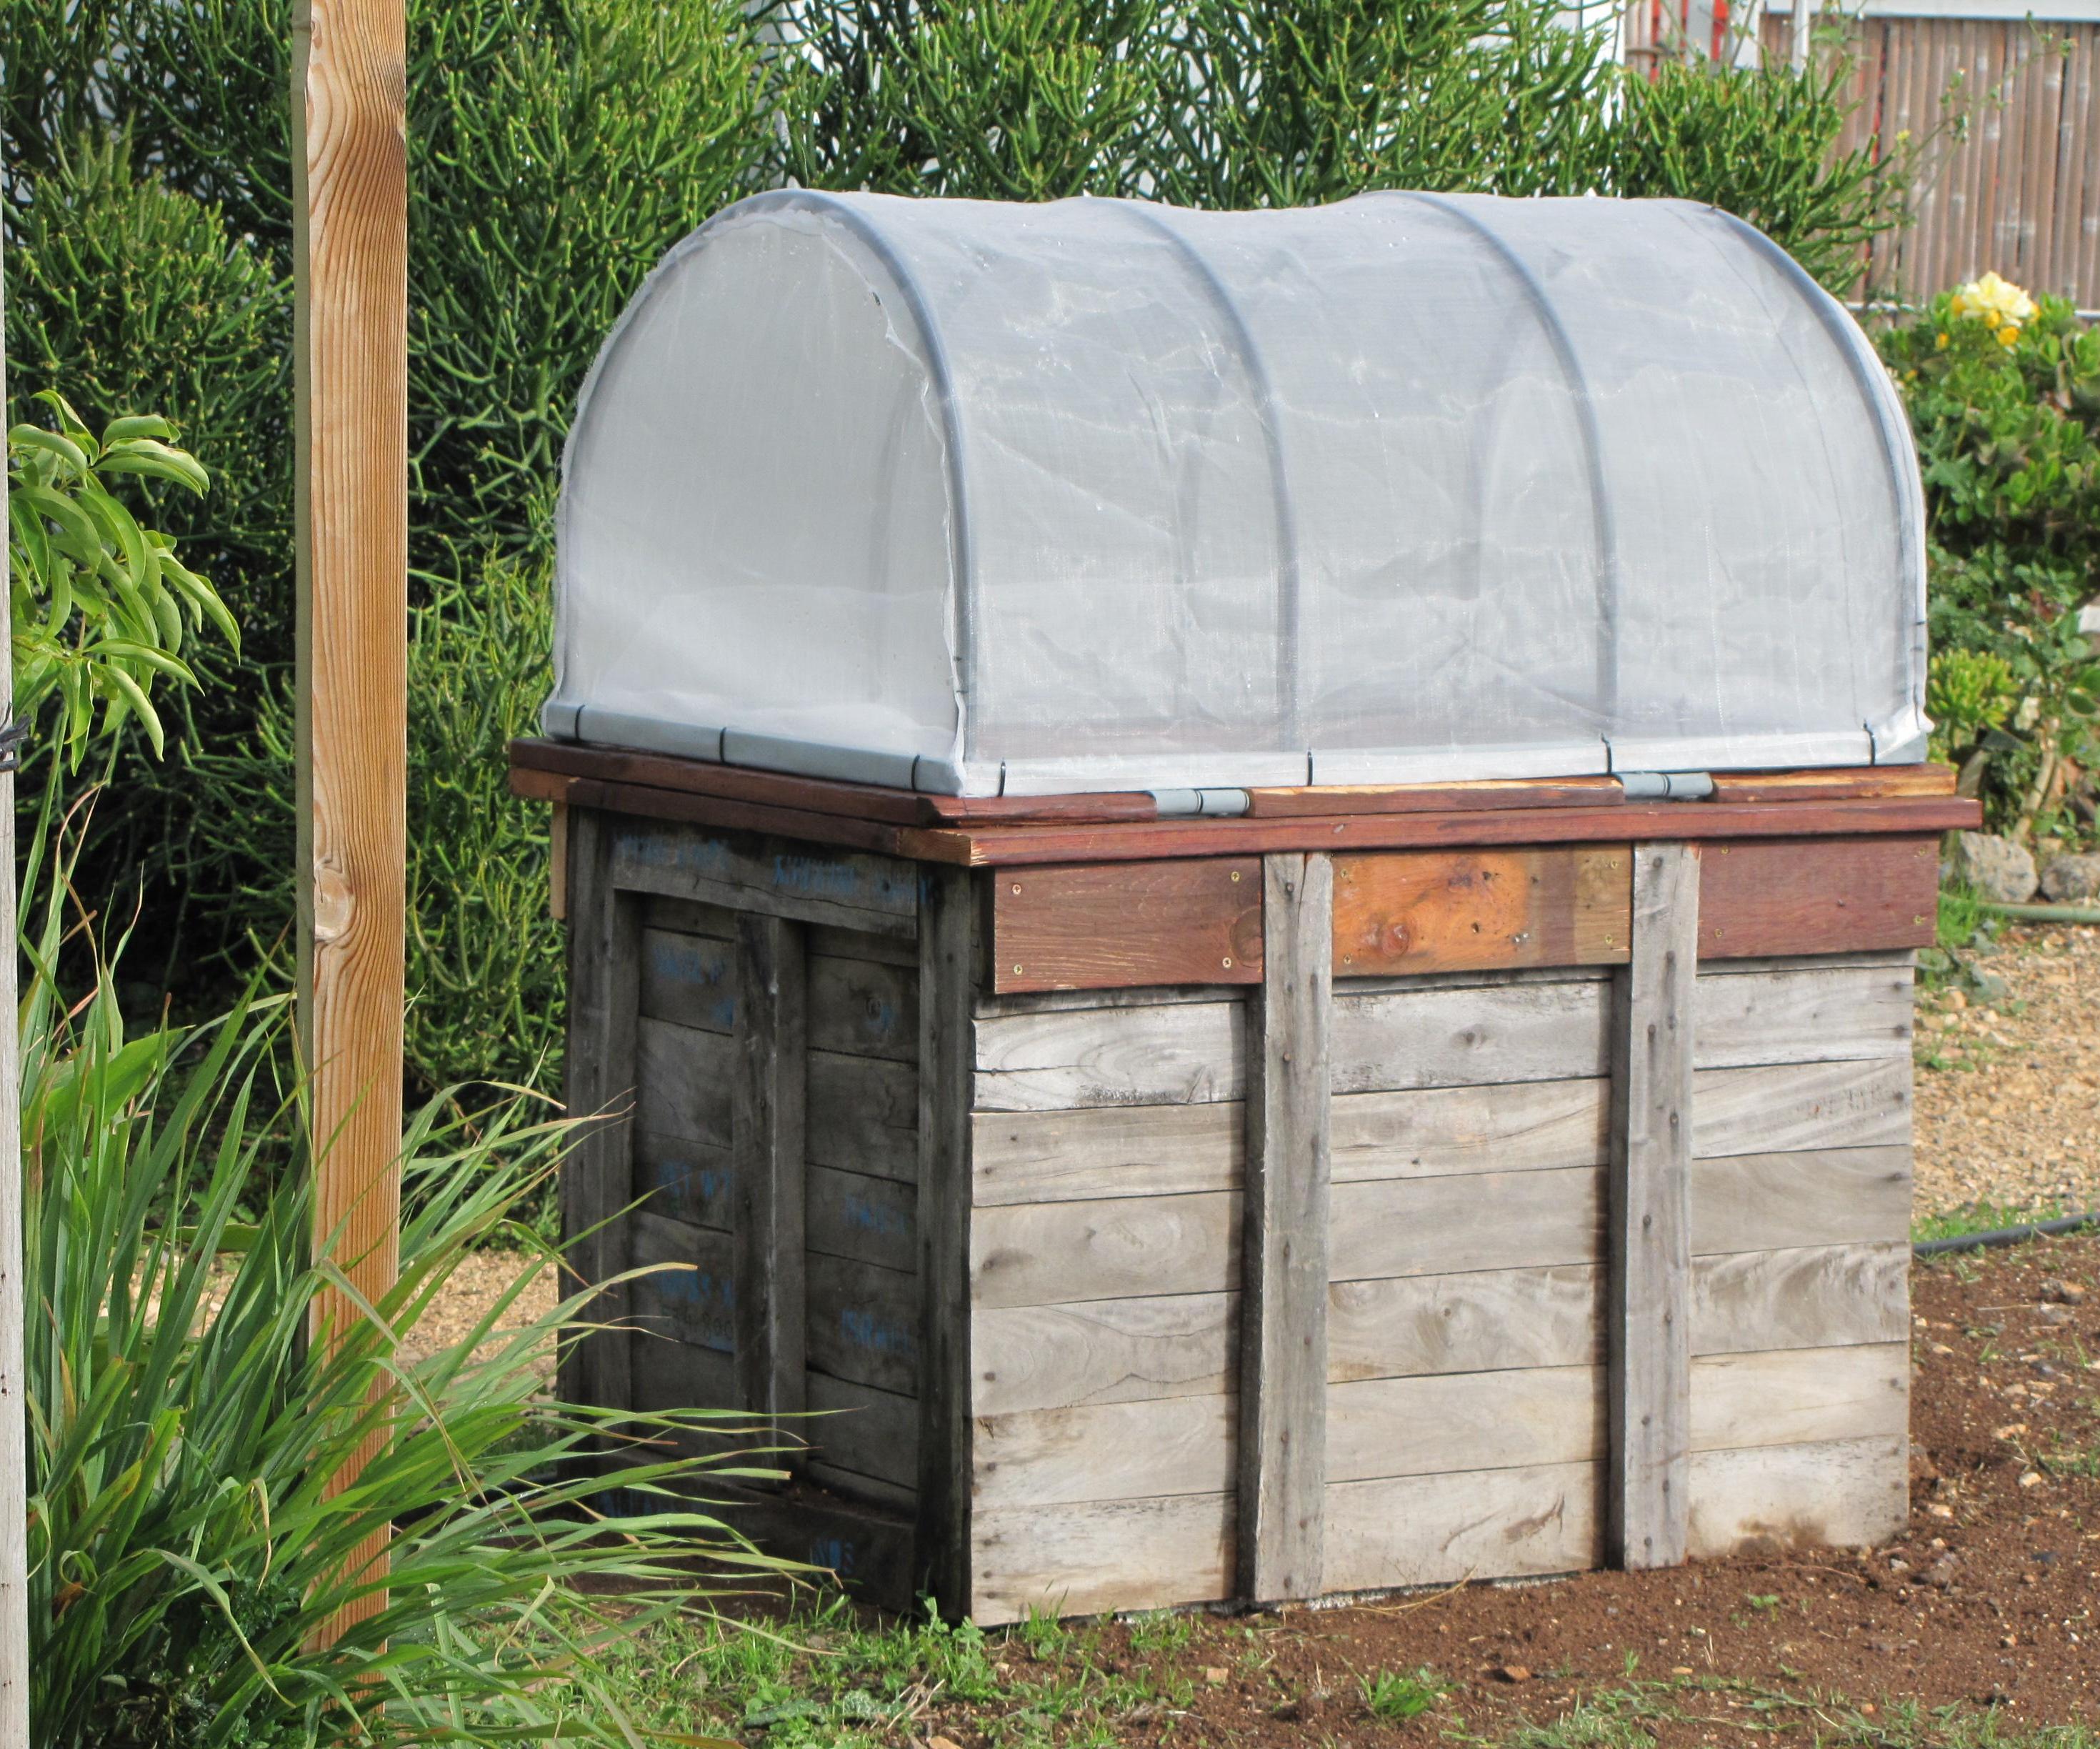 How to Build a Raised Bed Garden With Hinged Cover (Recycled Materials)